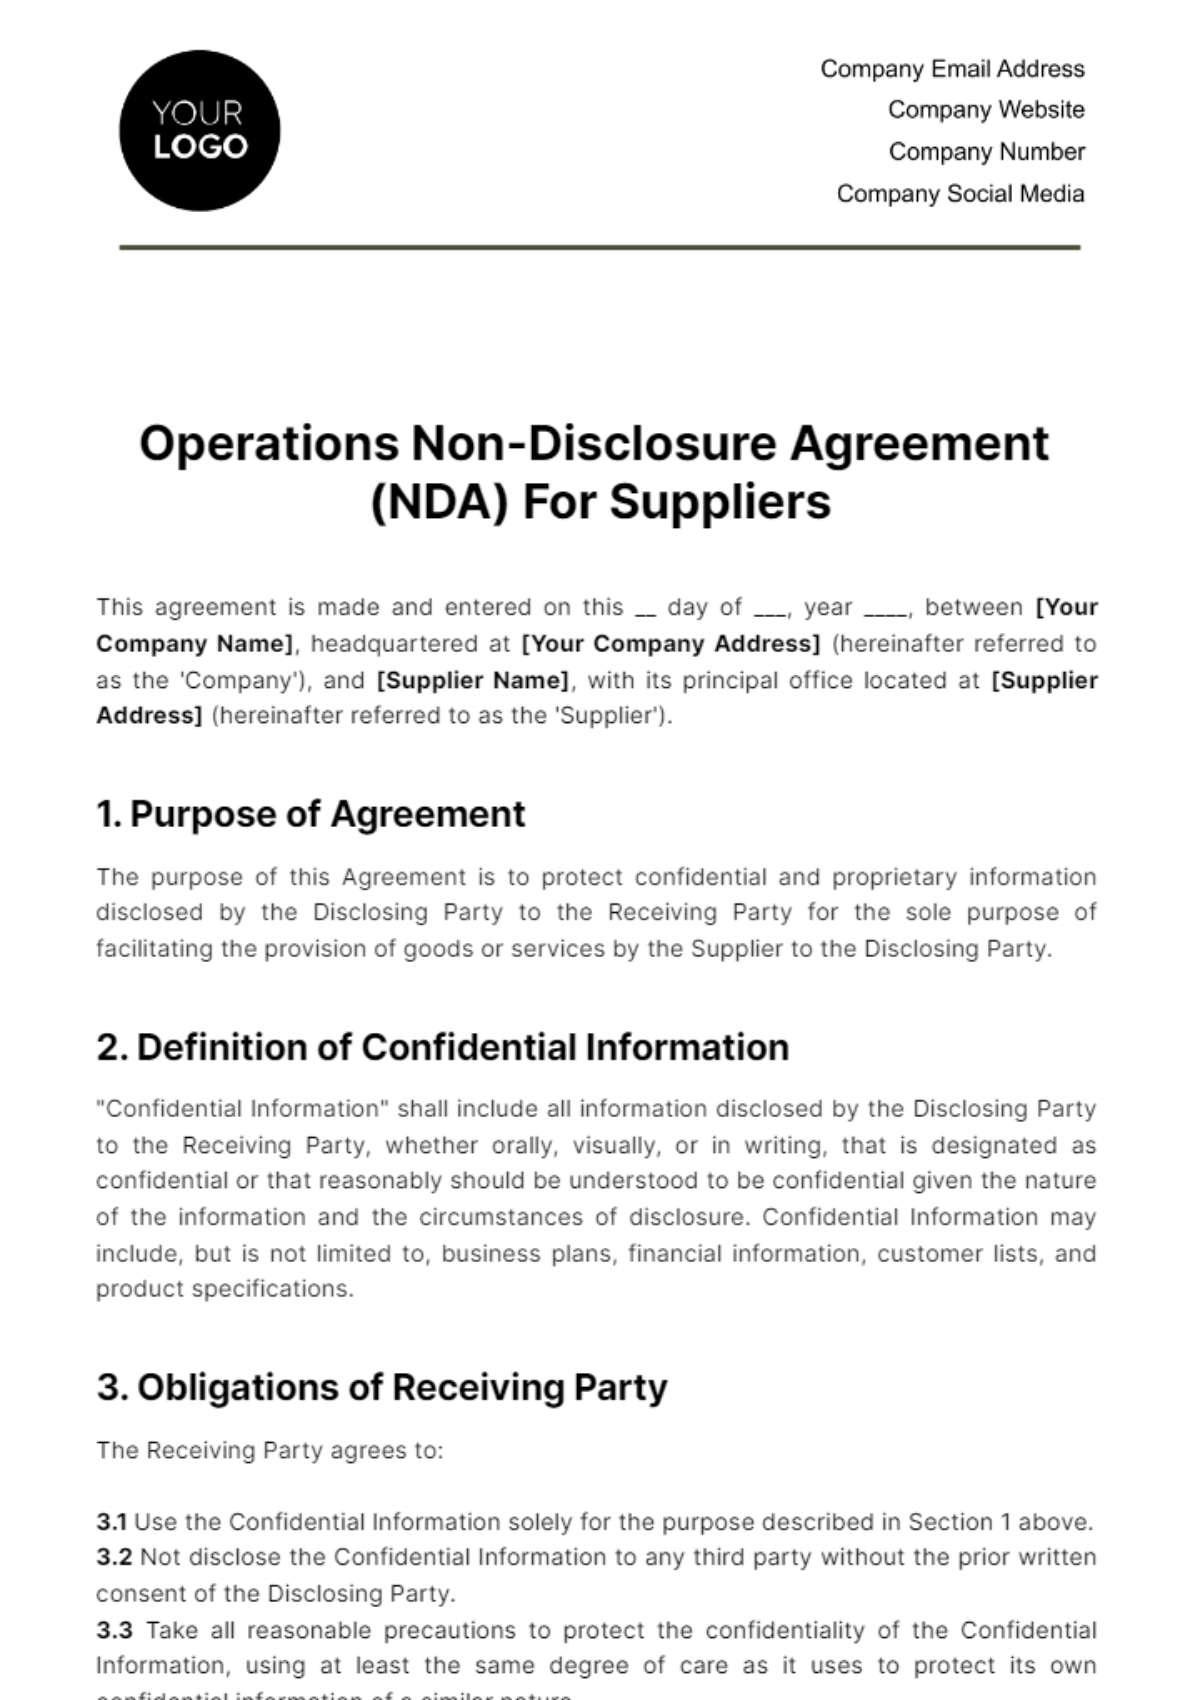 Operations Non-Disclosure Agreement (NDA) for Suppliers Template